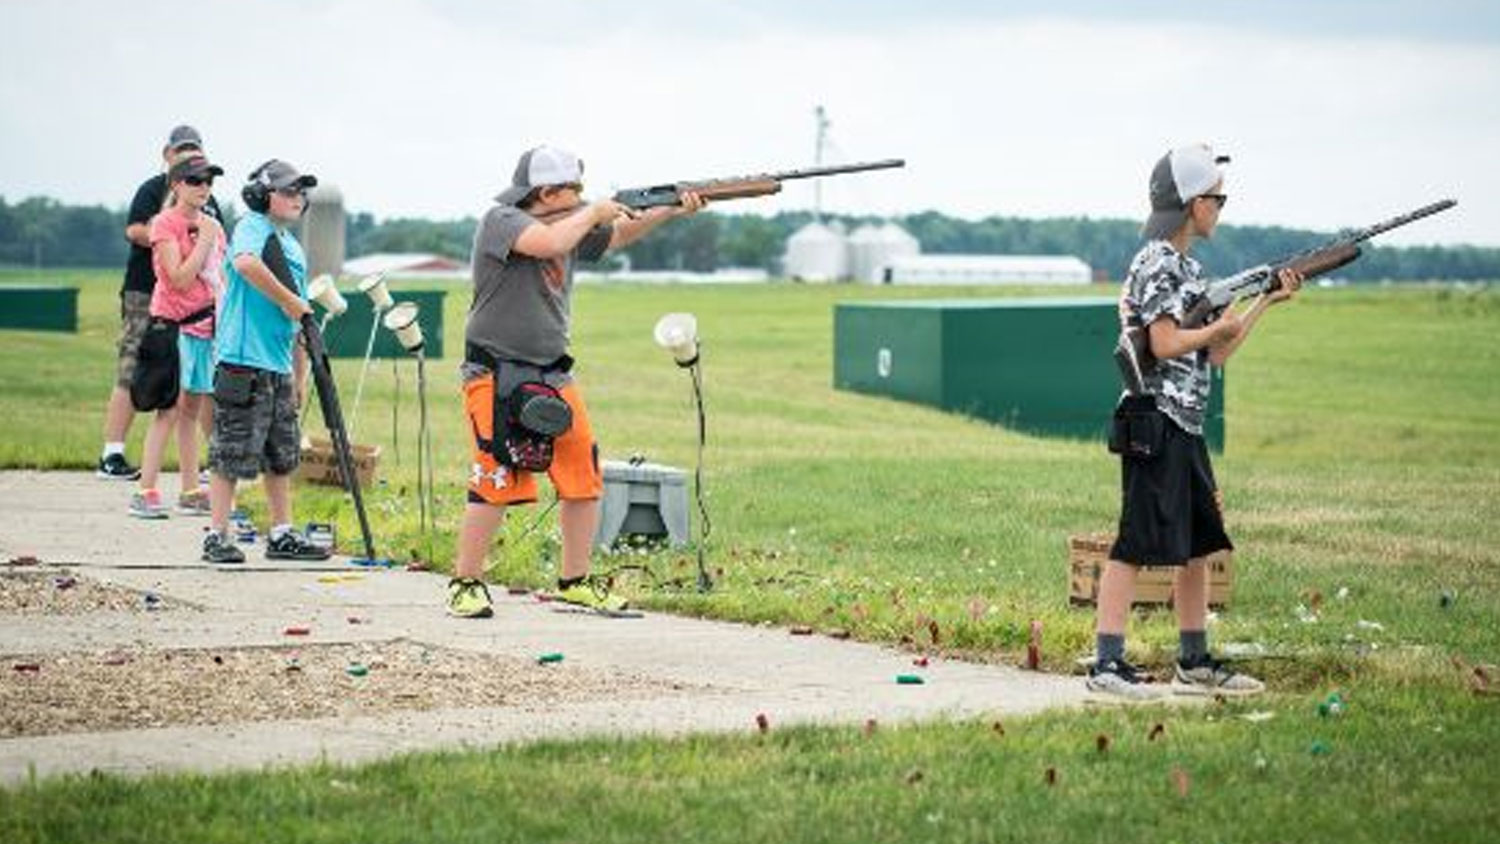 SCTP youth shooters.